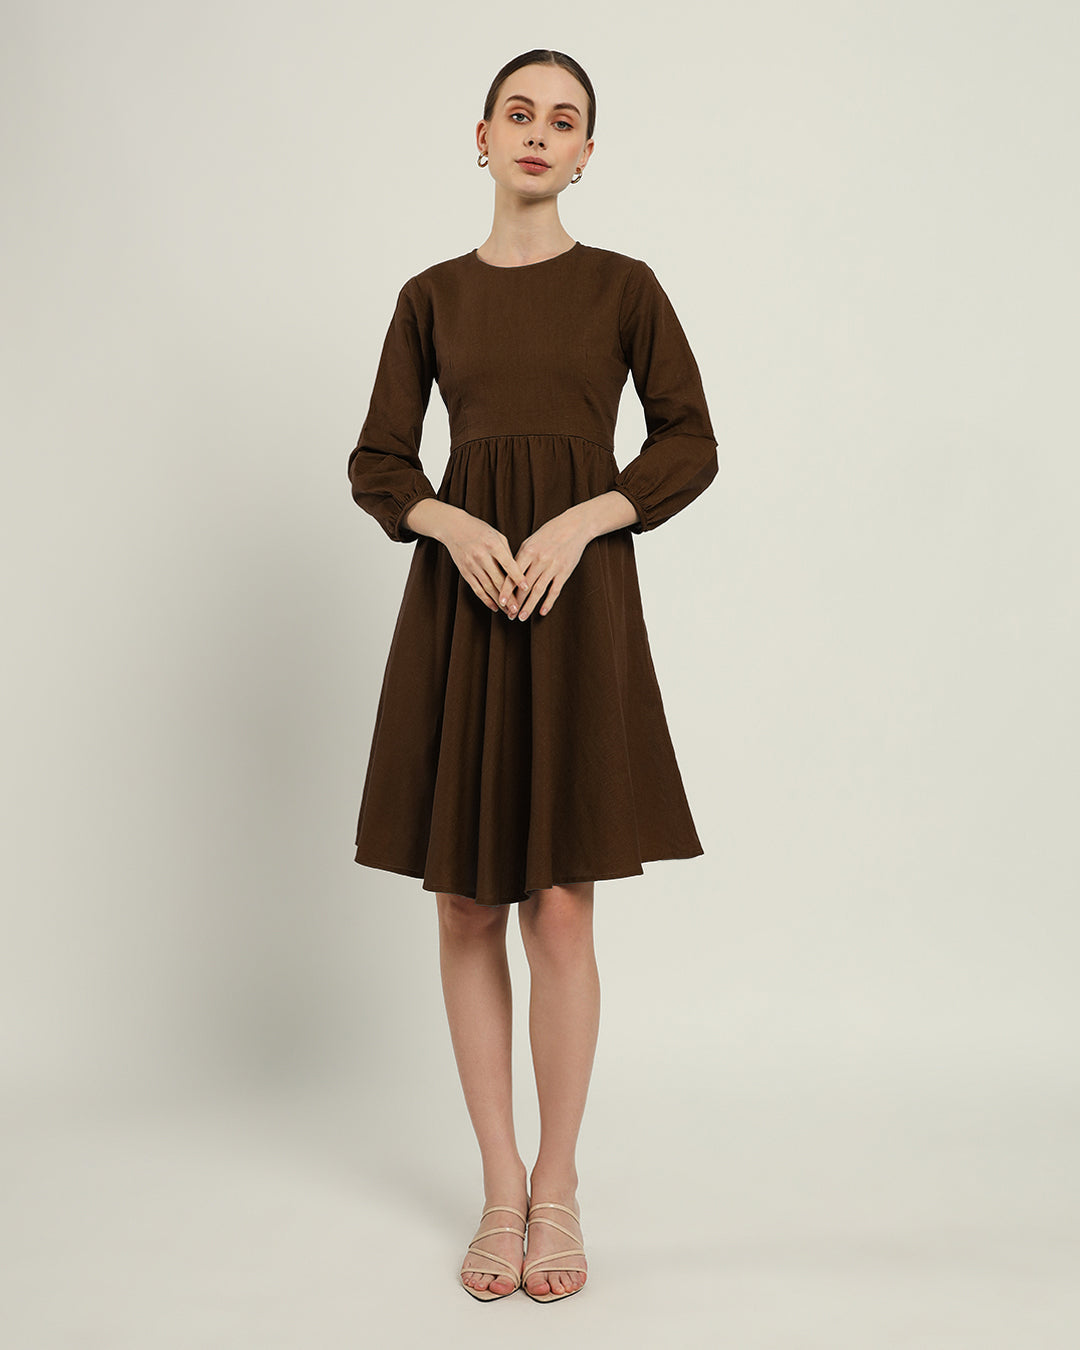 The Exeter Nutshell Dress